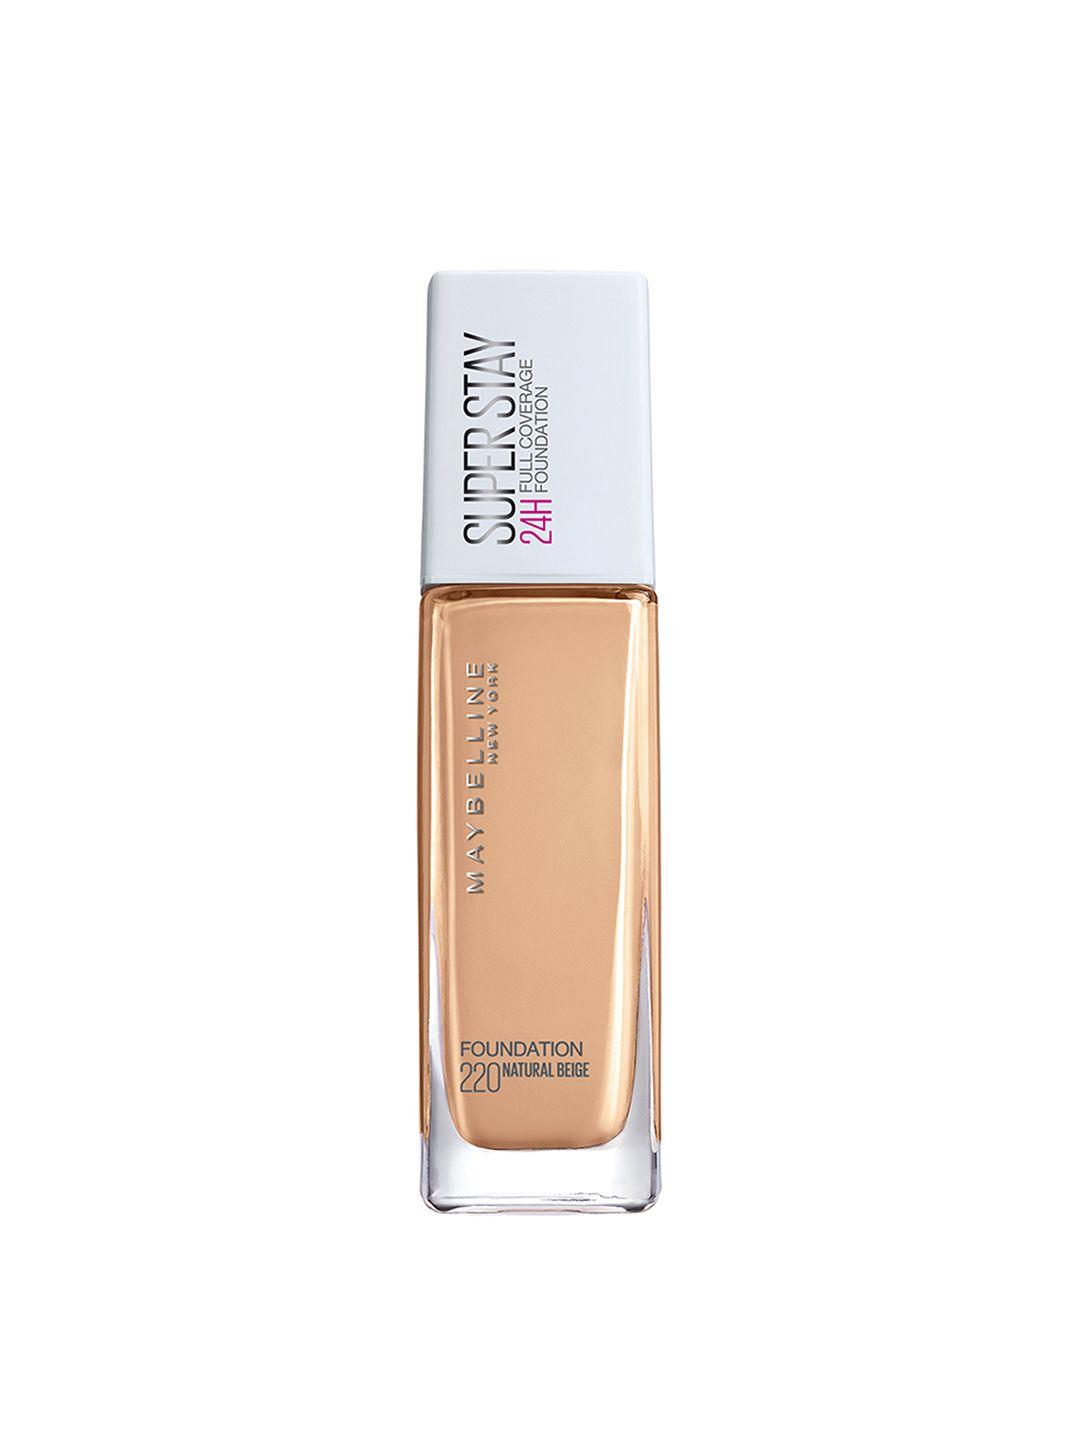 maybelline new york super stay 24h full coverage liquid foundation - natural beige 220